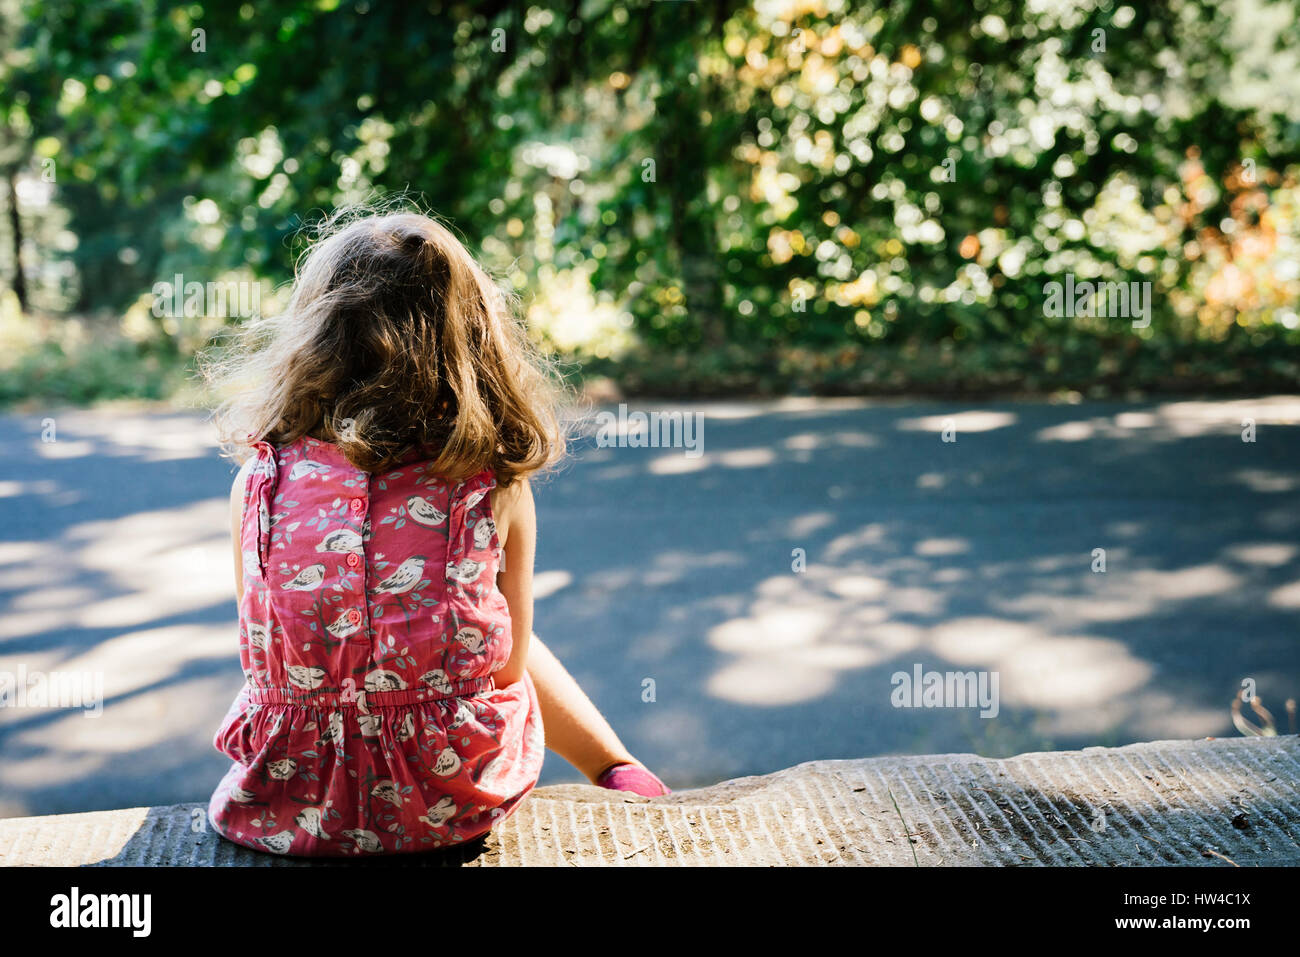 Caucasian girl sitting on curb Banque D'Images